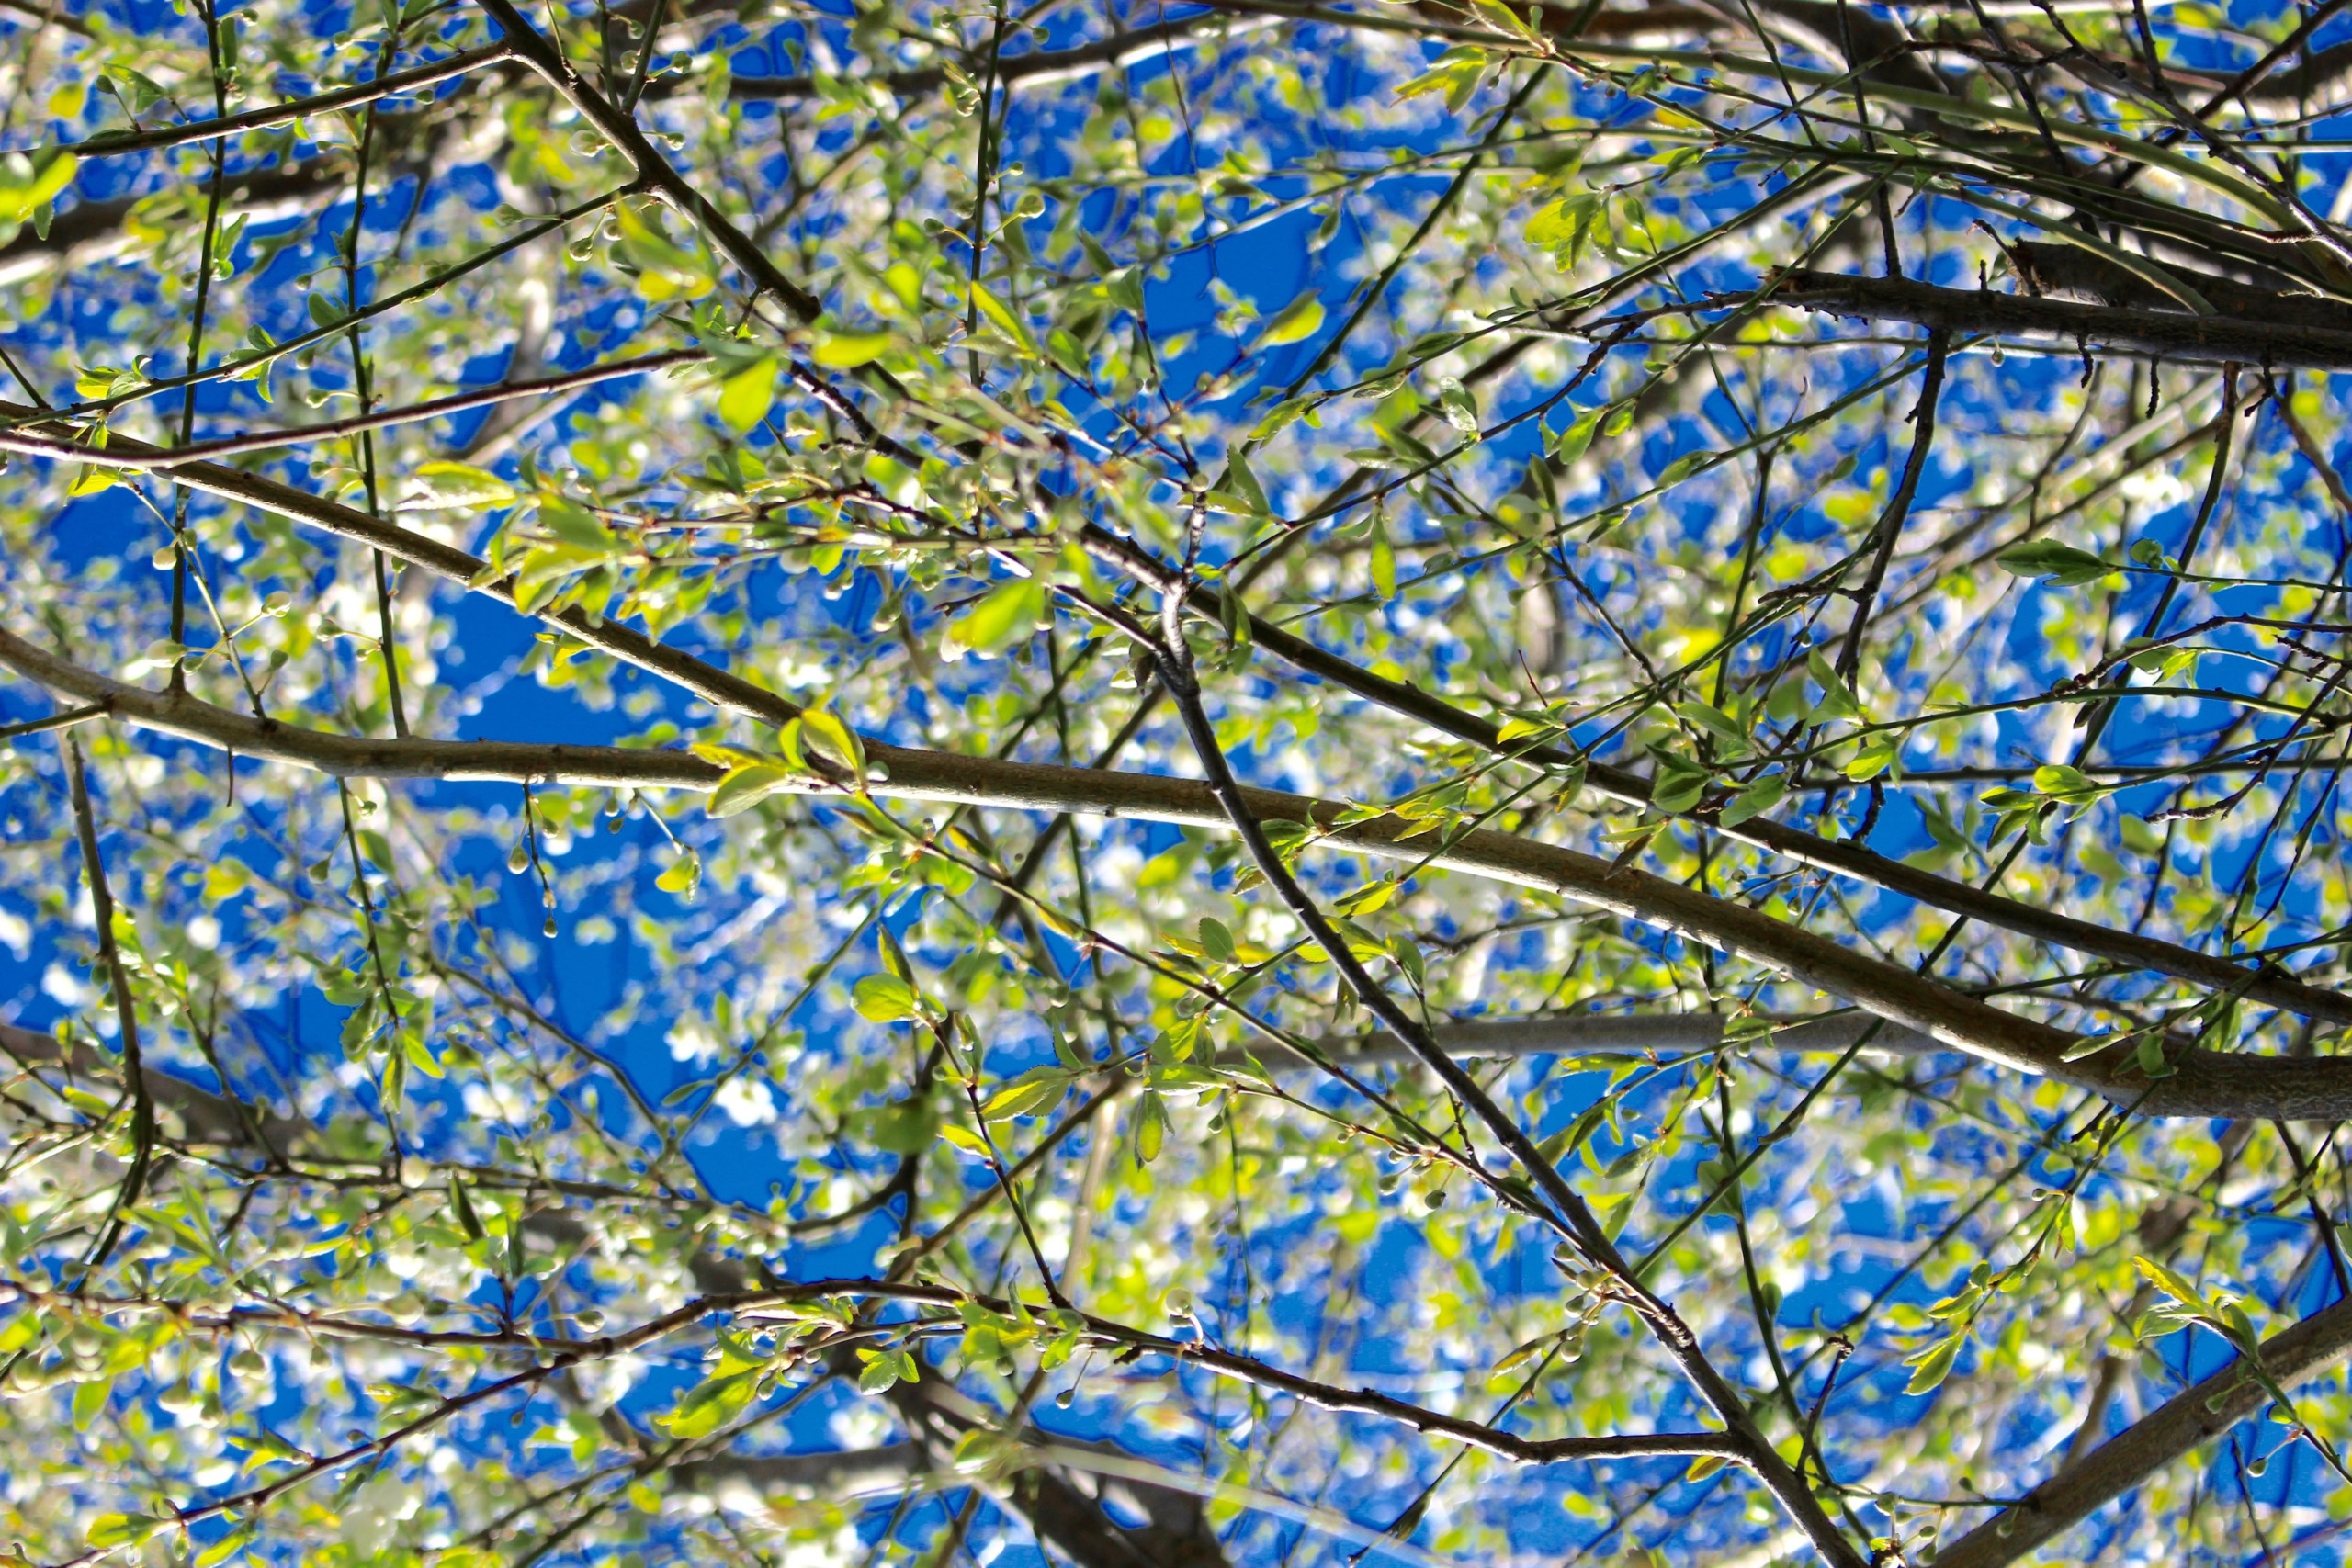 A closeup of tree branches with small green leaves, showing a blue sky in the background.